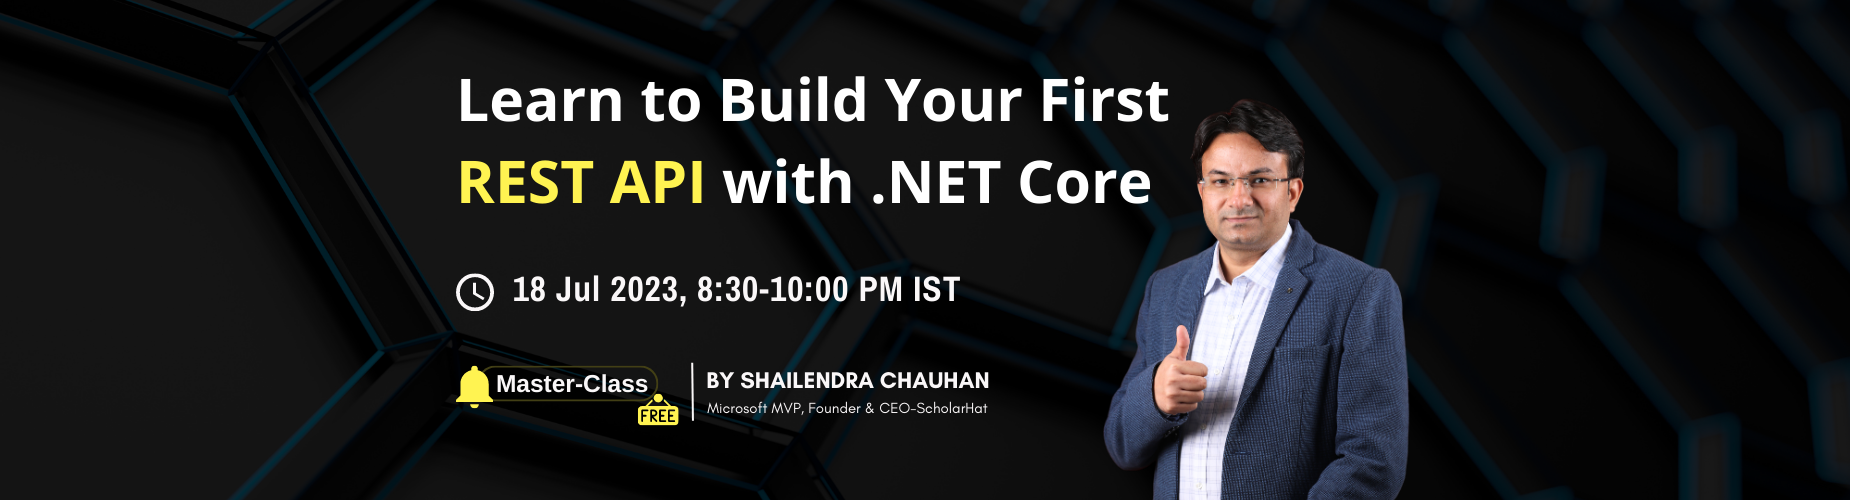 Learn to Build Your First WebAPI with .NET Core